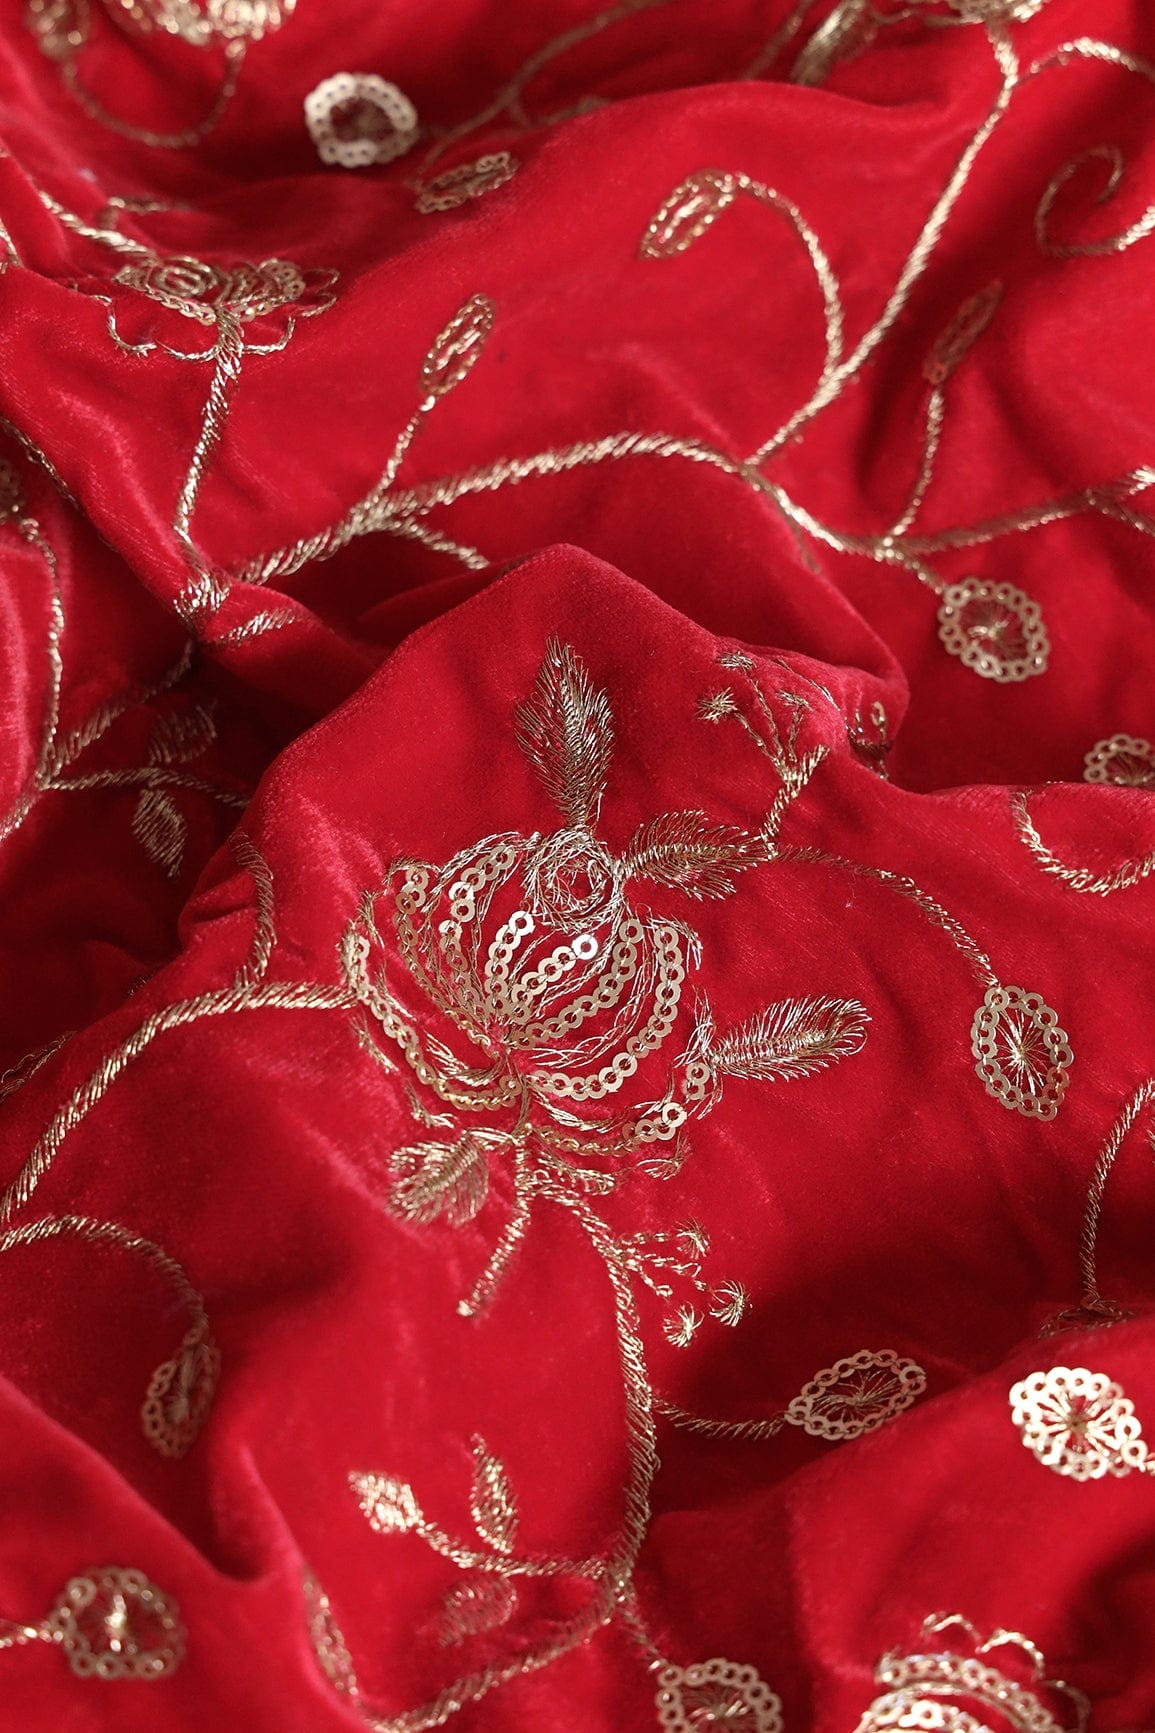 doeraa Embroidery Fabrics Gold Sequins With Gold Zari Beautiful Floral Embroidery On Red Velvet Fabric